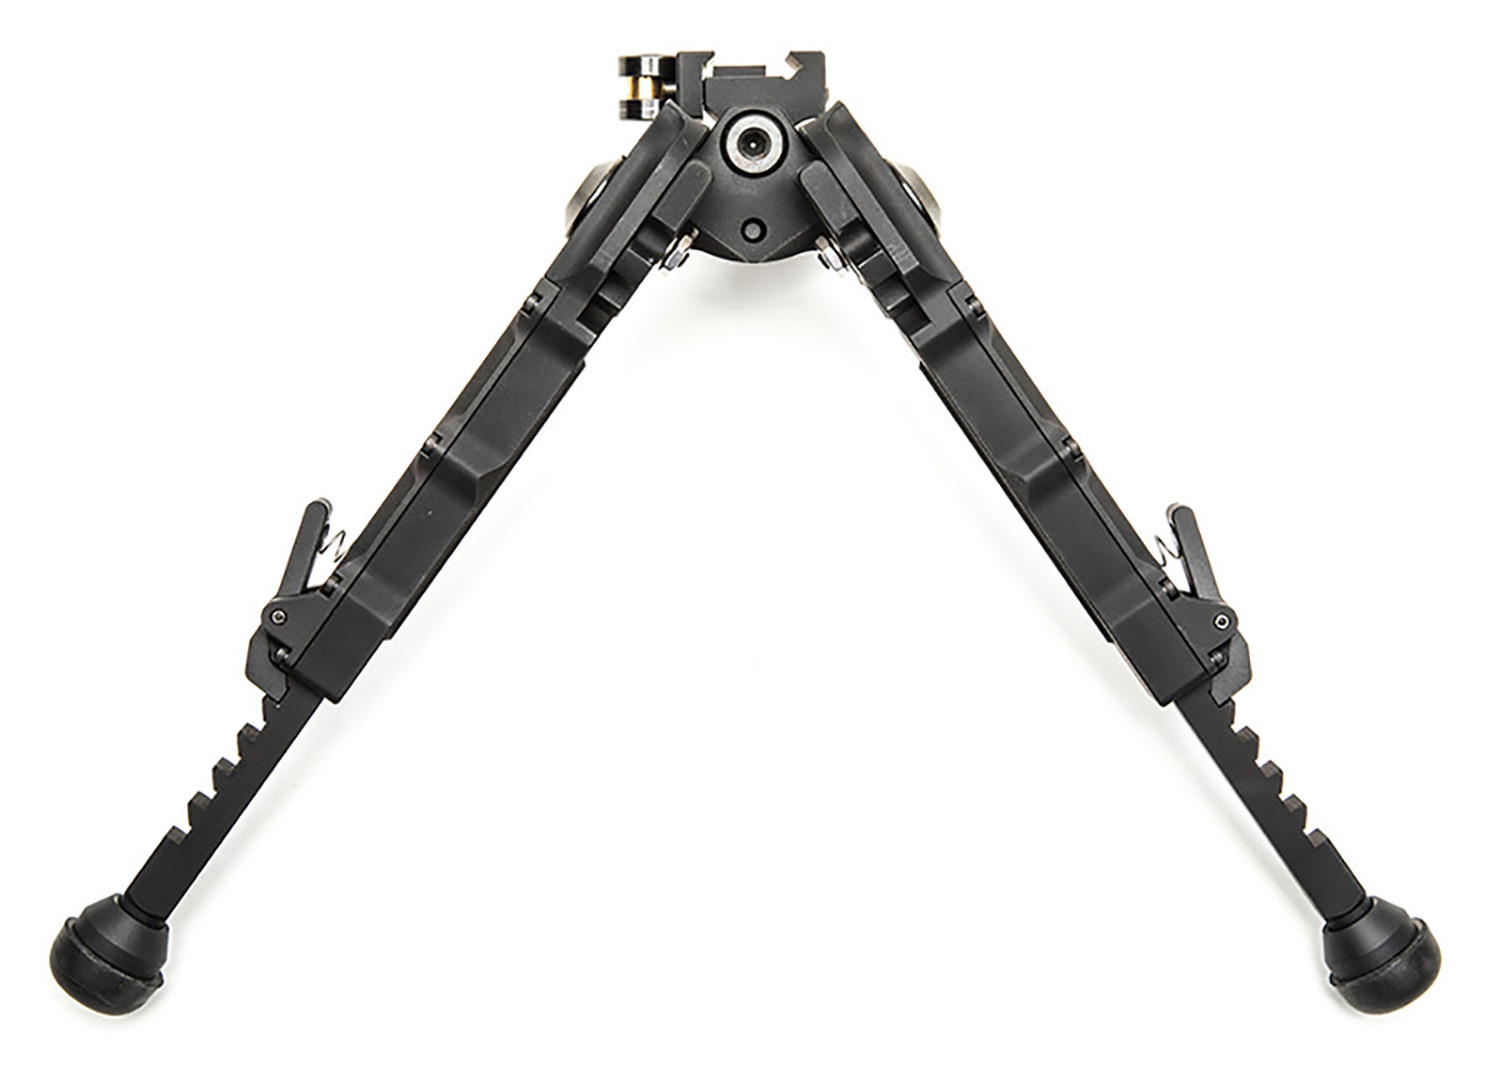 Accu-Tac BRASG204 BR-4 G2 Arca Spec Bipod made of Black Hardcoat Anodized Aluminum with ARCA Style Rail Attachment, Steel Feet & 5.75